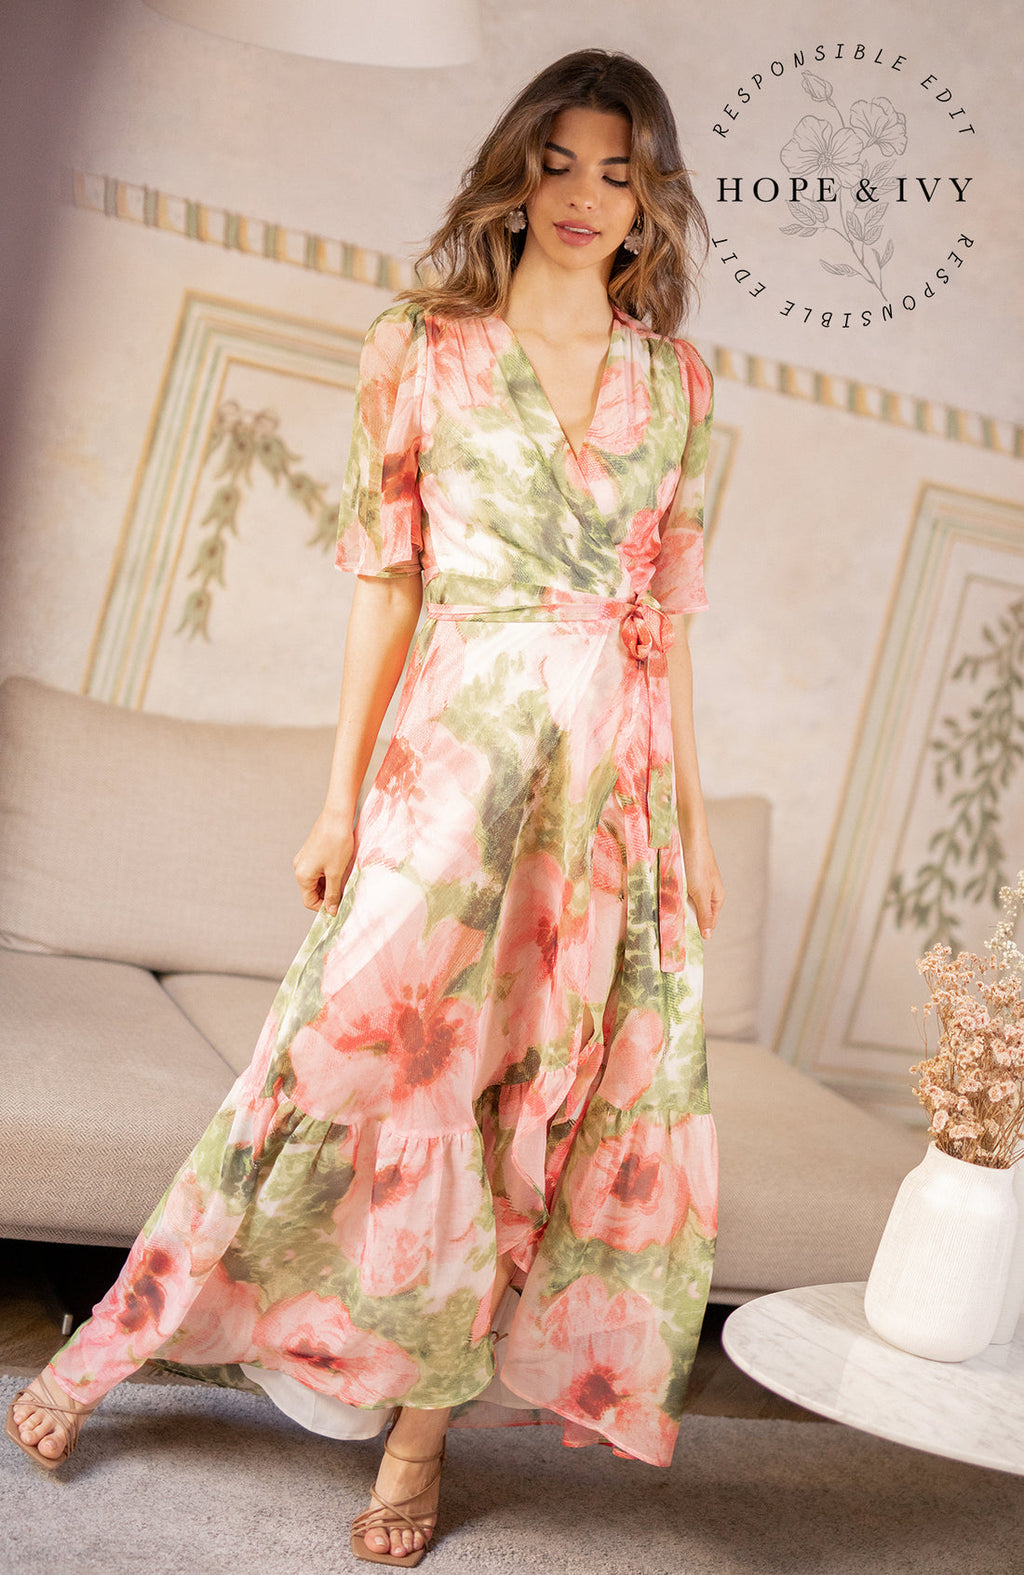 The hand-design print depicts romantic brushed petals in muted florals scattered on a soft base. Full flutter sleeves and a tie waist feature complete the wrap front bodice with a drop hem skirt that finishes at floor length. Whatever this Spring has in hold for you, glide with grace in this celestial dress.